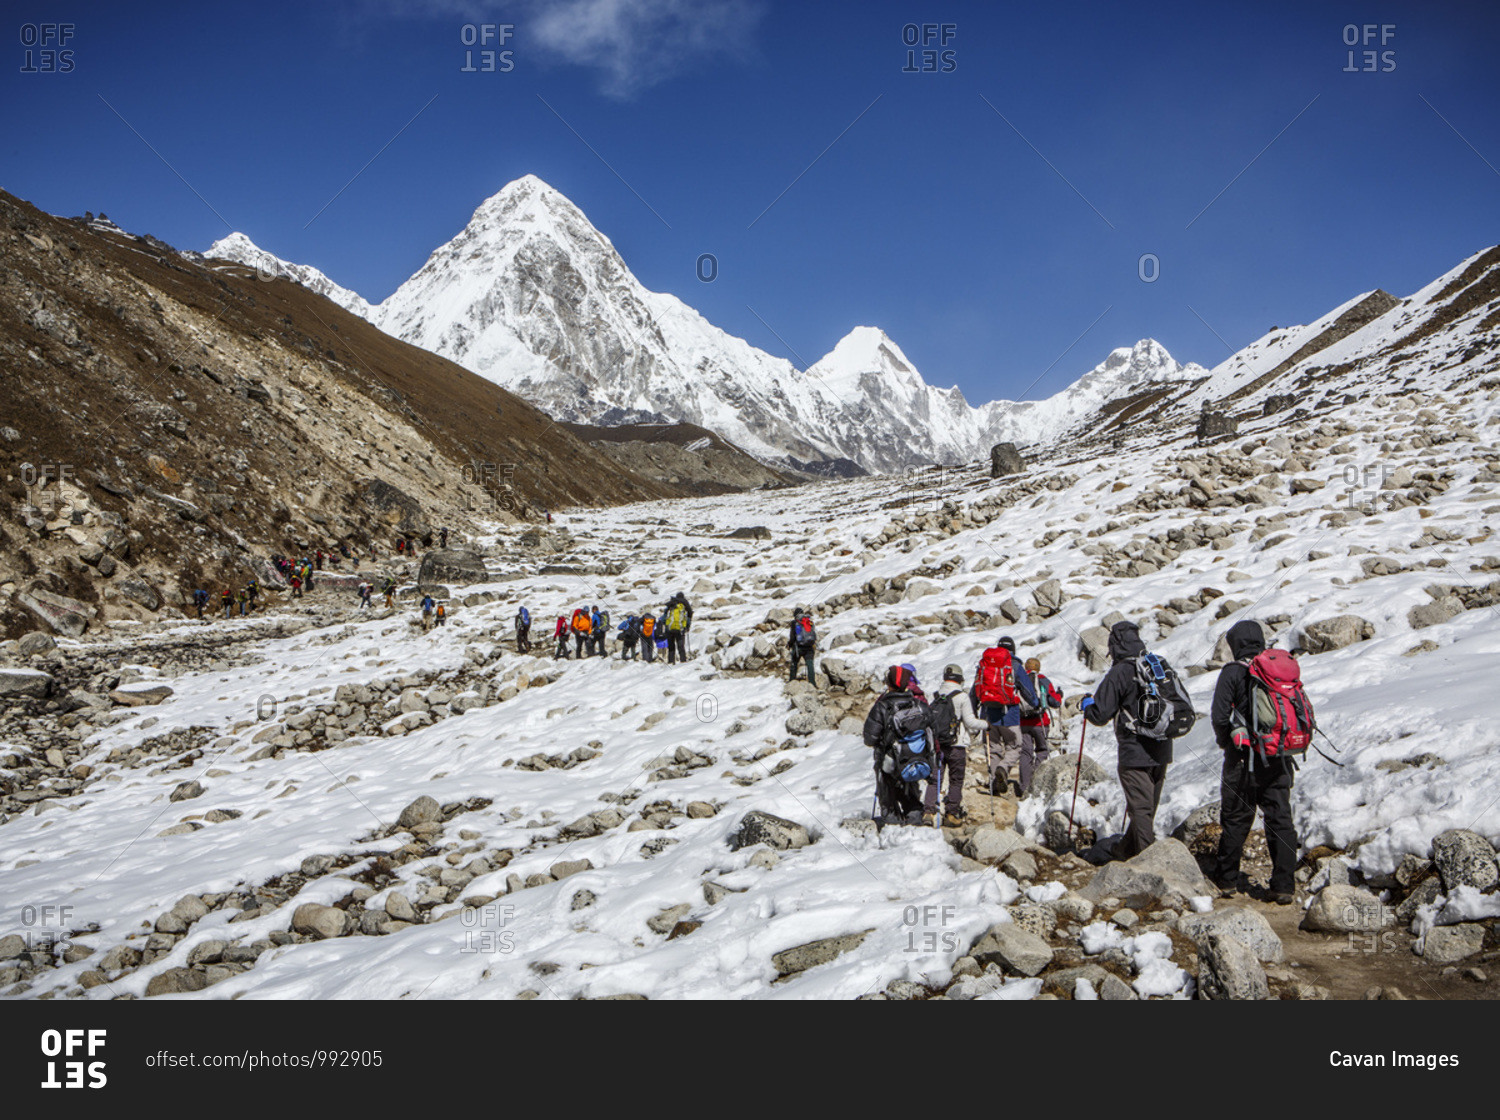 Hikers on the trail to Mt Everest Base Camp in Nepal.